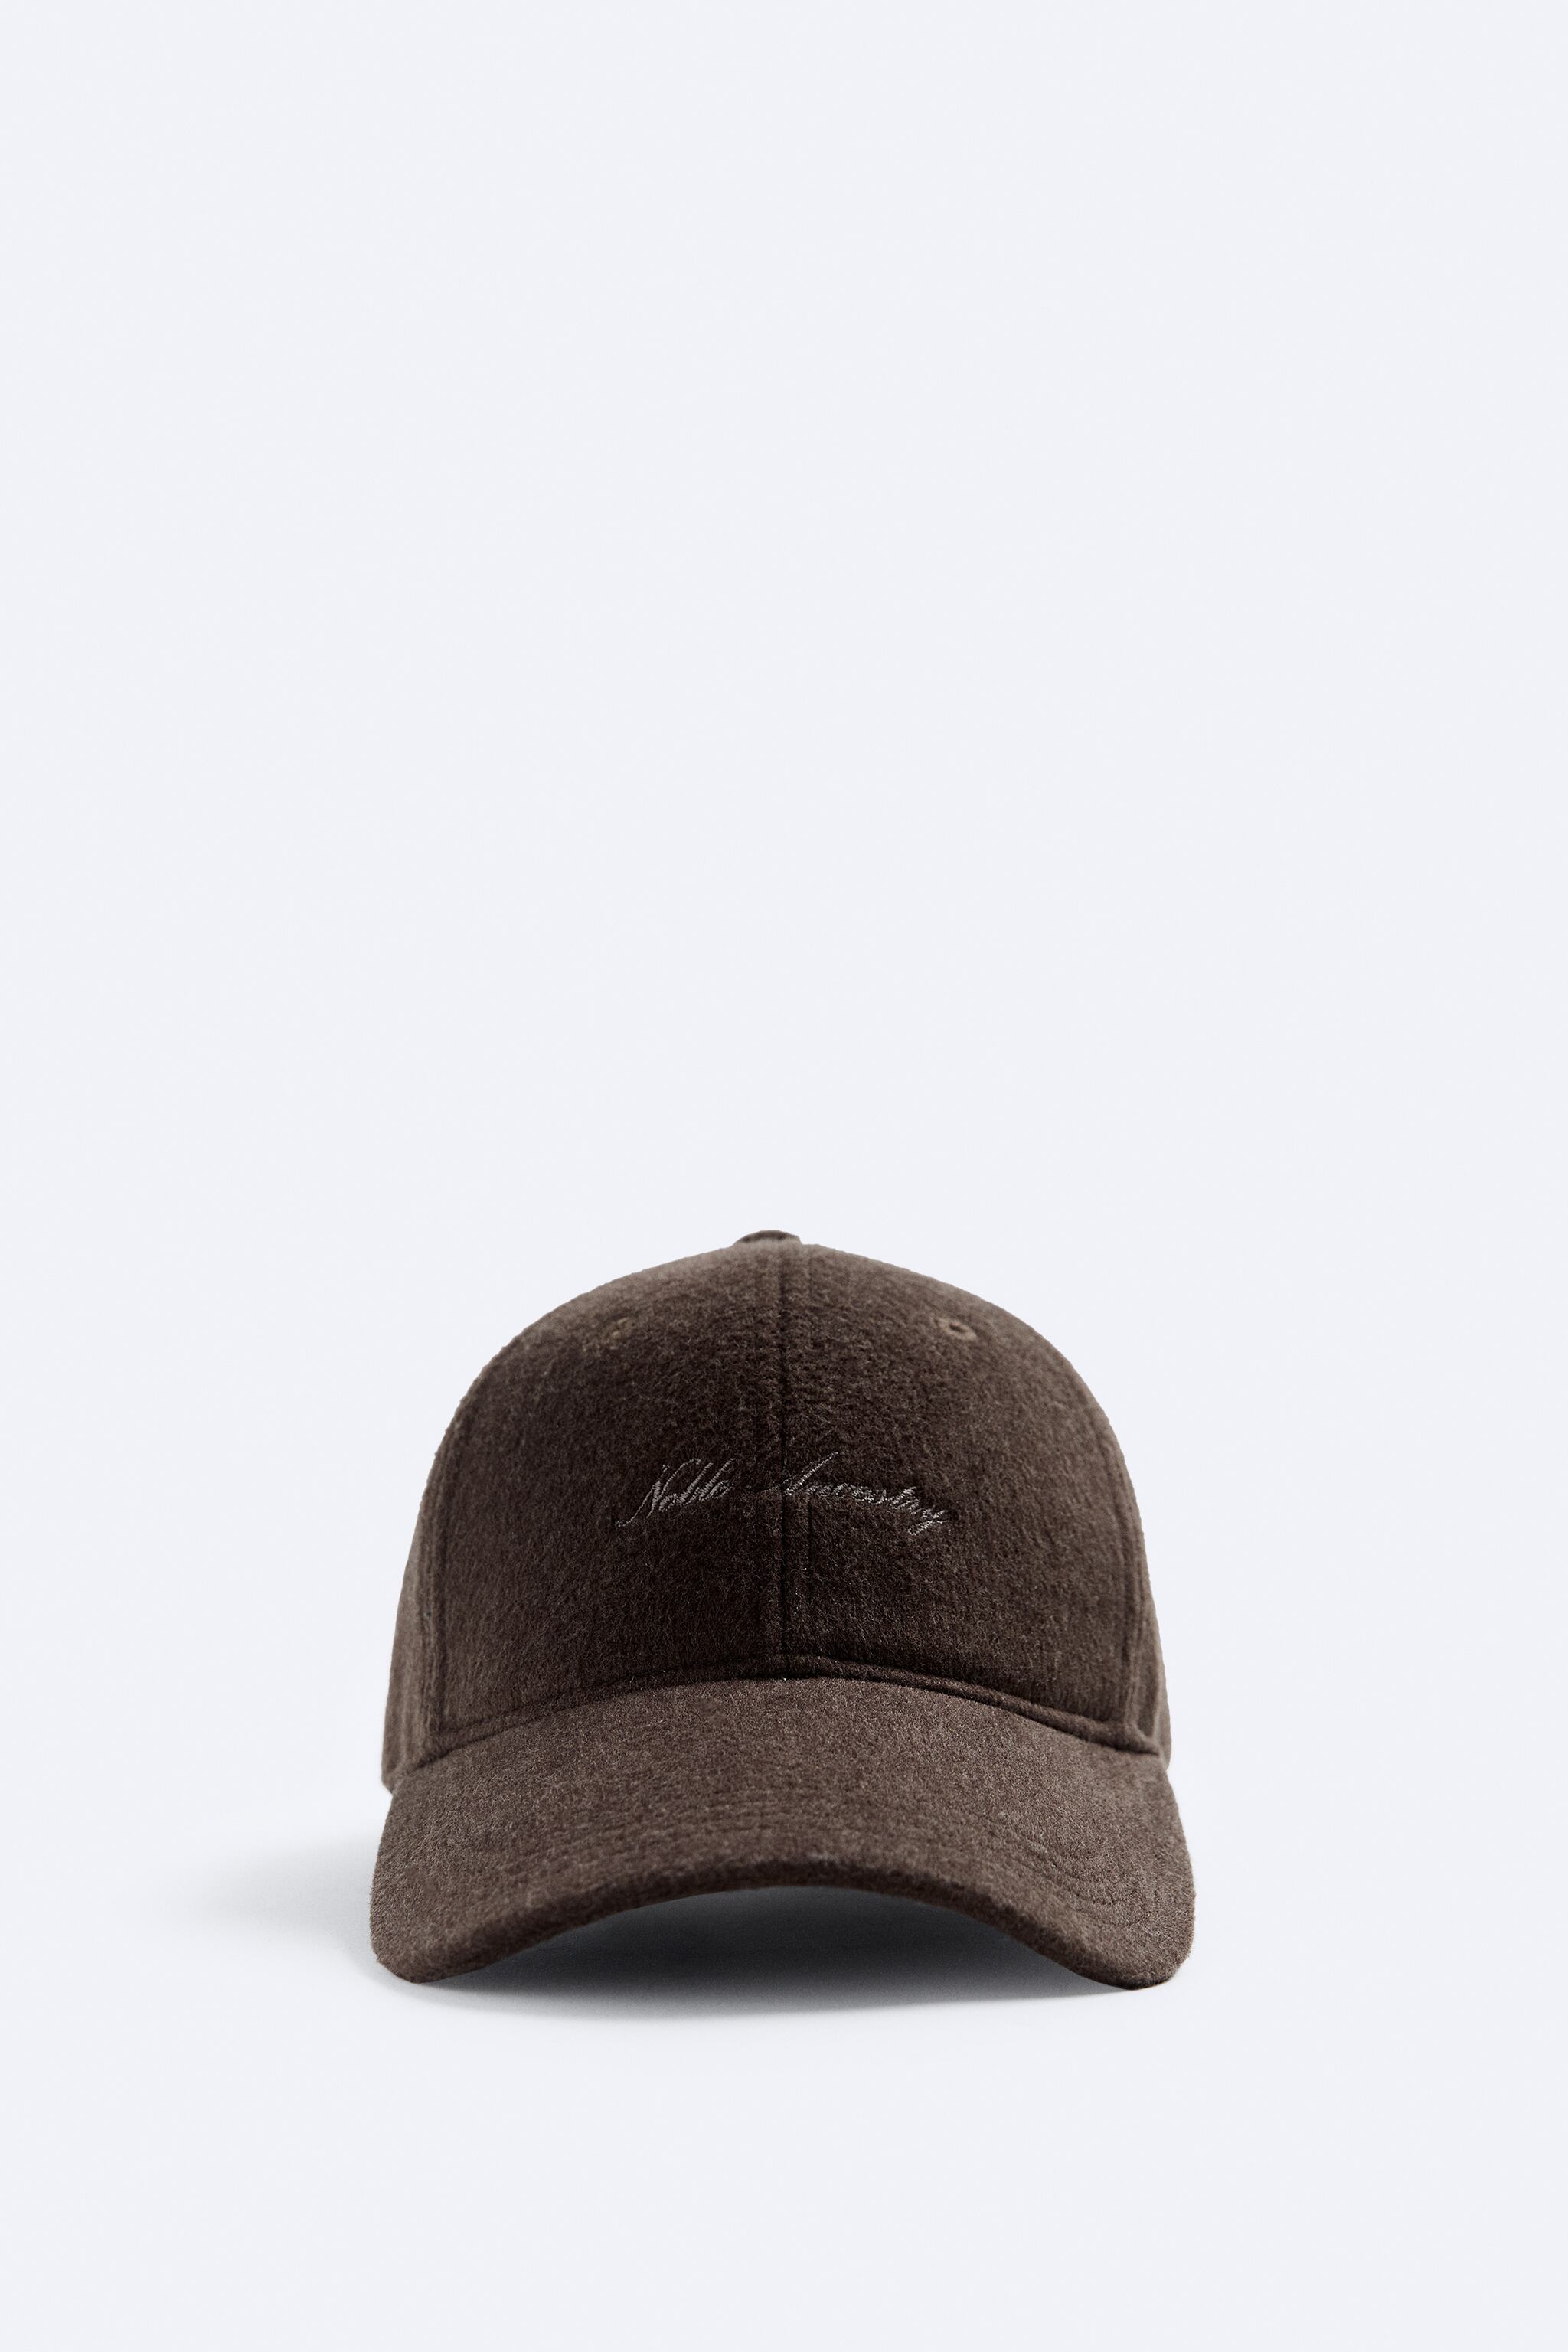 EMBROIDERED TEXT CAP